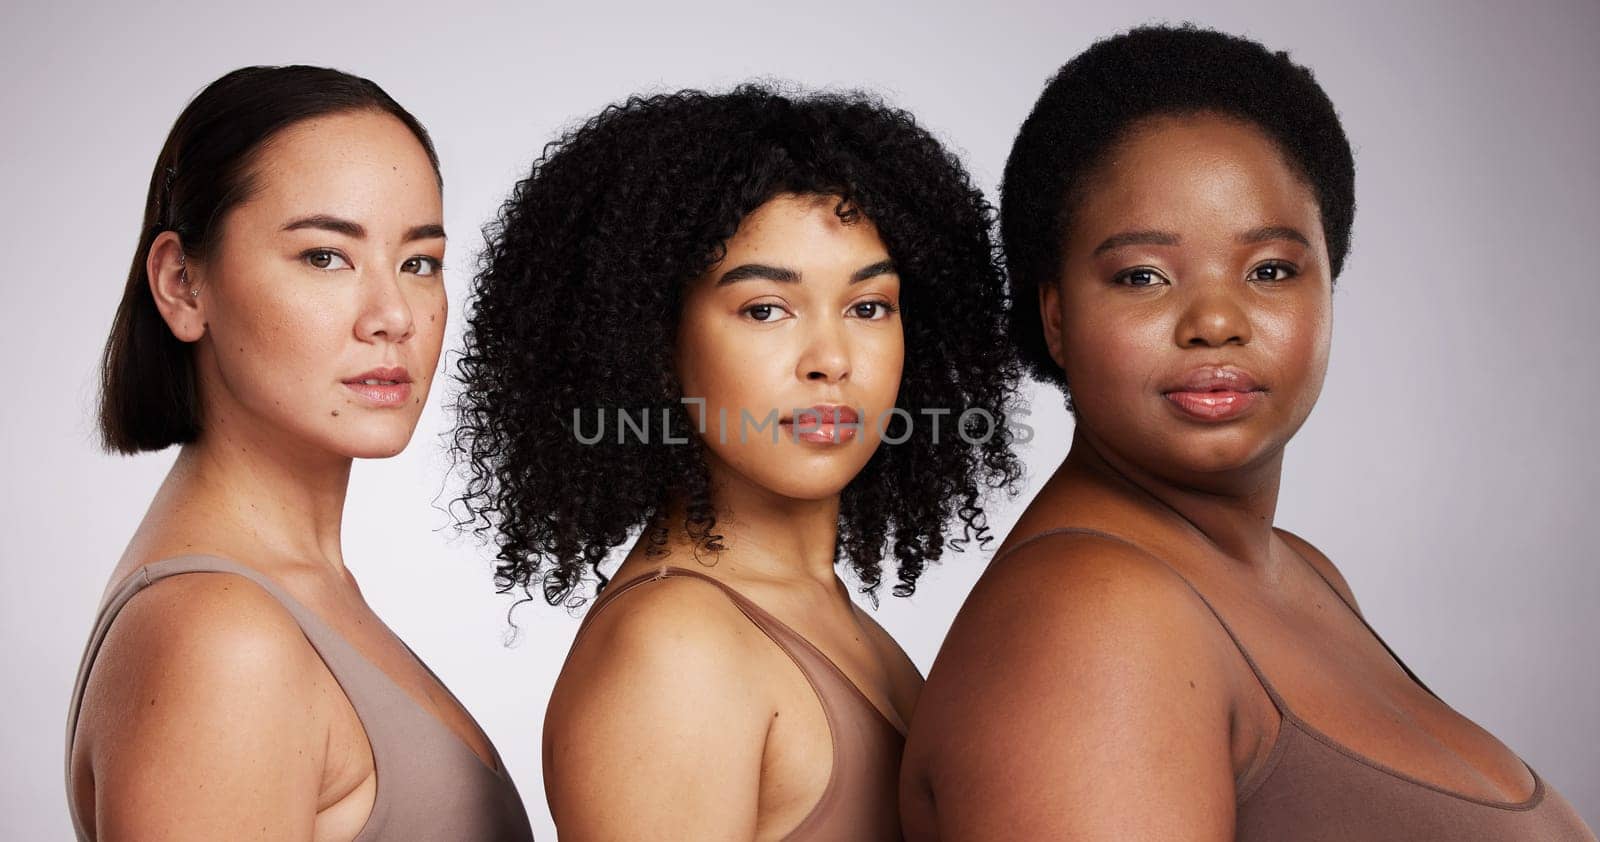 Women, diversity studio portrait and beauty for aesthetic, care or race equality with plus size solidarity. Model, asian and black woman with cosmetics, makeup and wellness with support by background.